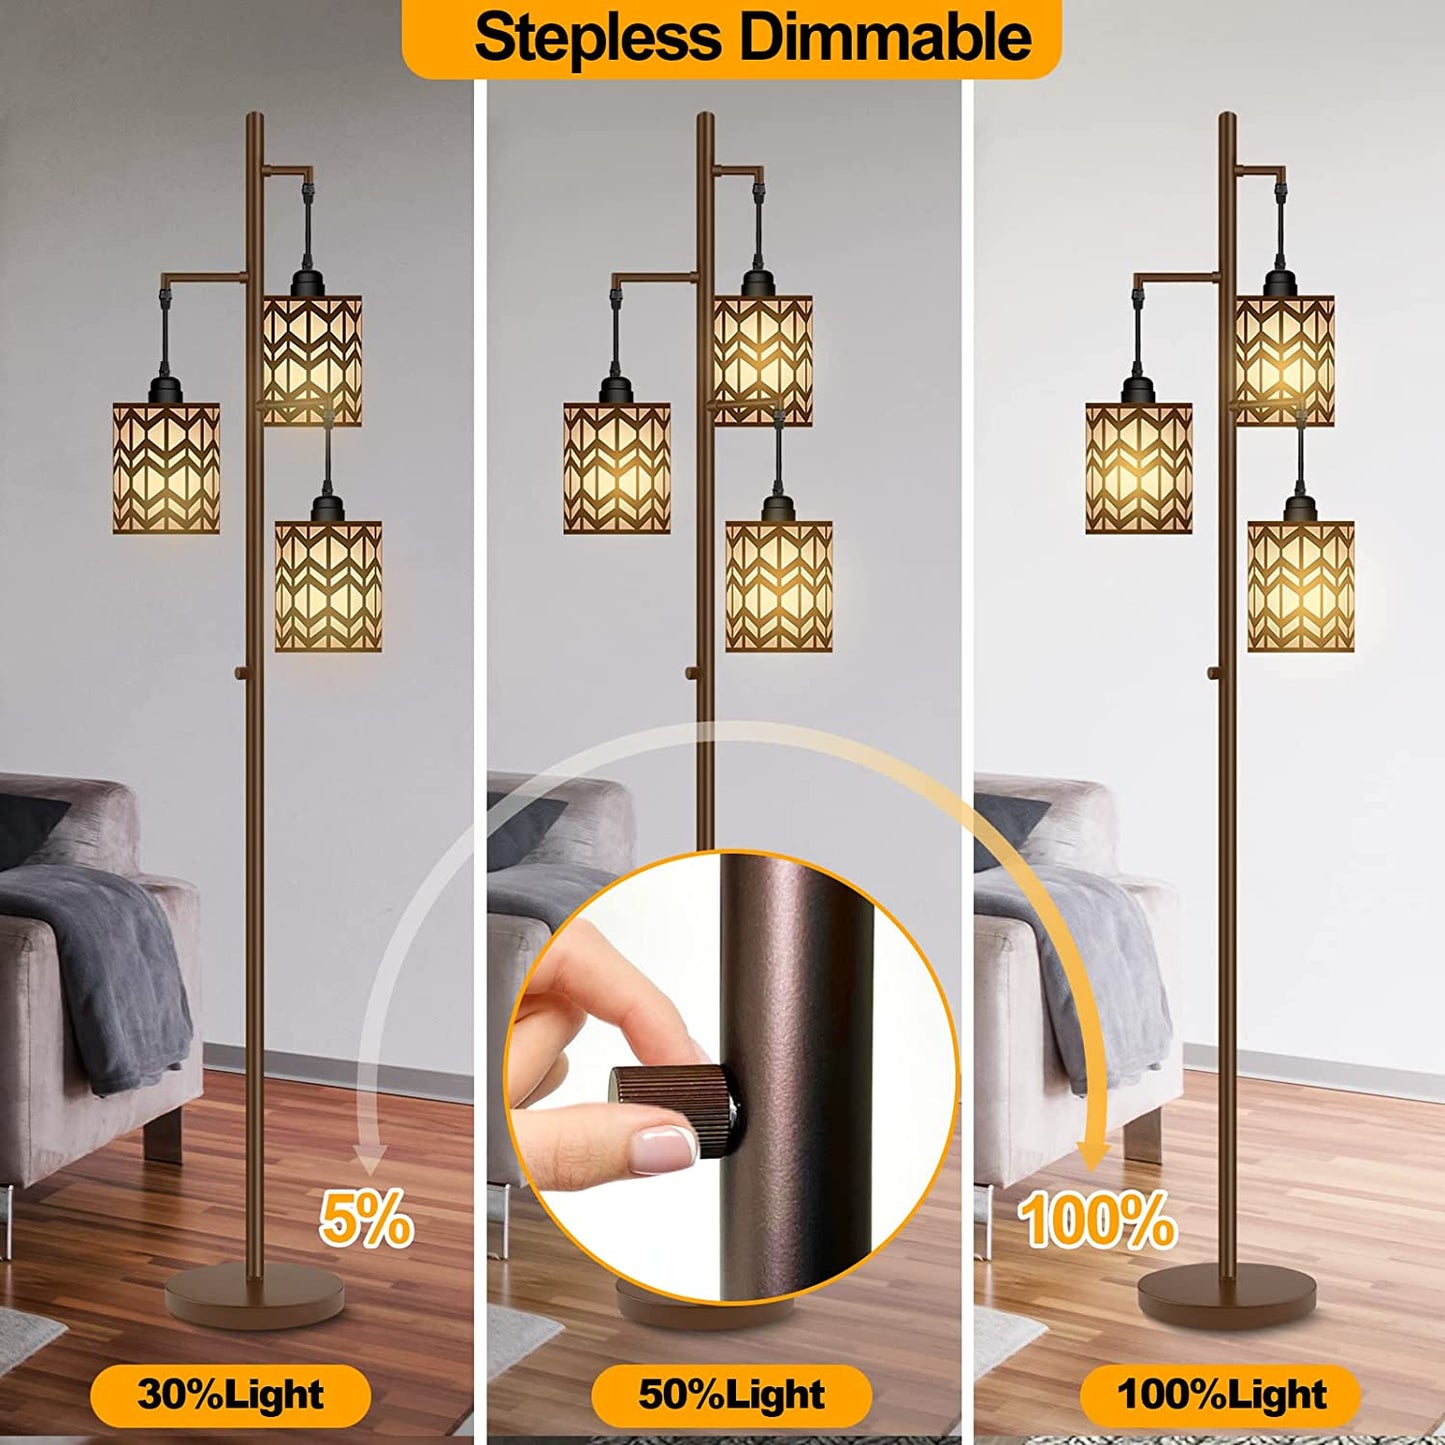 Dimmable Floor Lamp, Industrial Standing Floor lamp for Living Room, Oil-Rubbed Bronze Vintage Tree Lamp Farmhouse Rustic Tall lamp with 3 x 800LM LED Bulbs and Metal Shade for Bedrooms Living Room